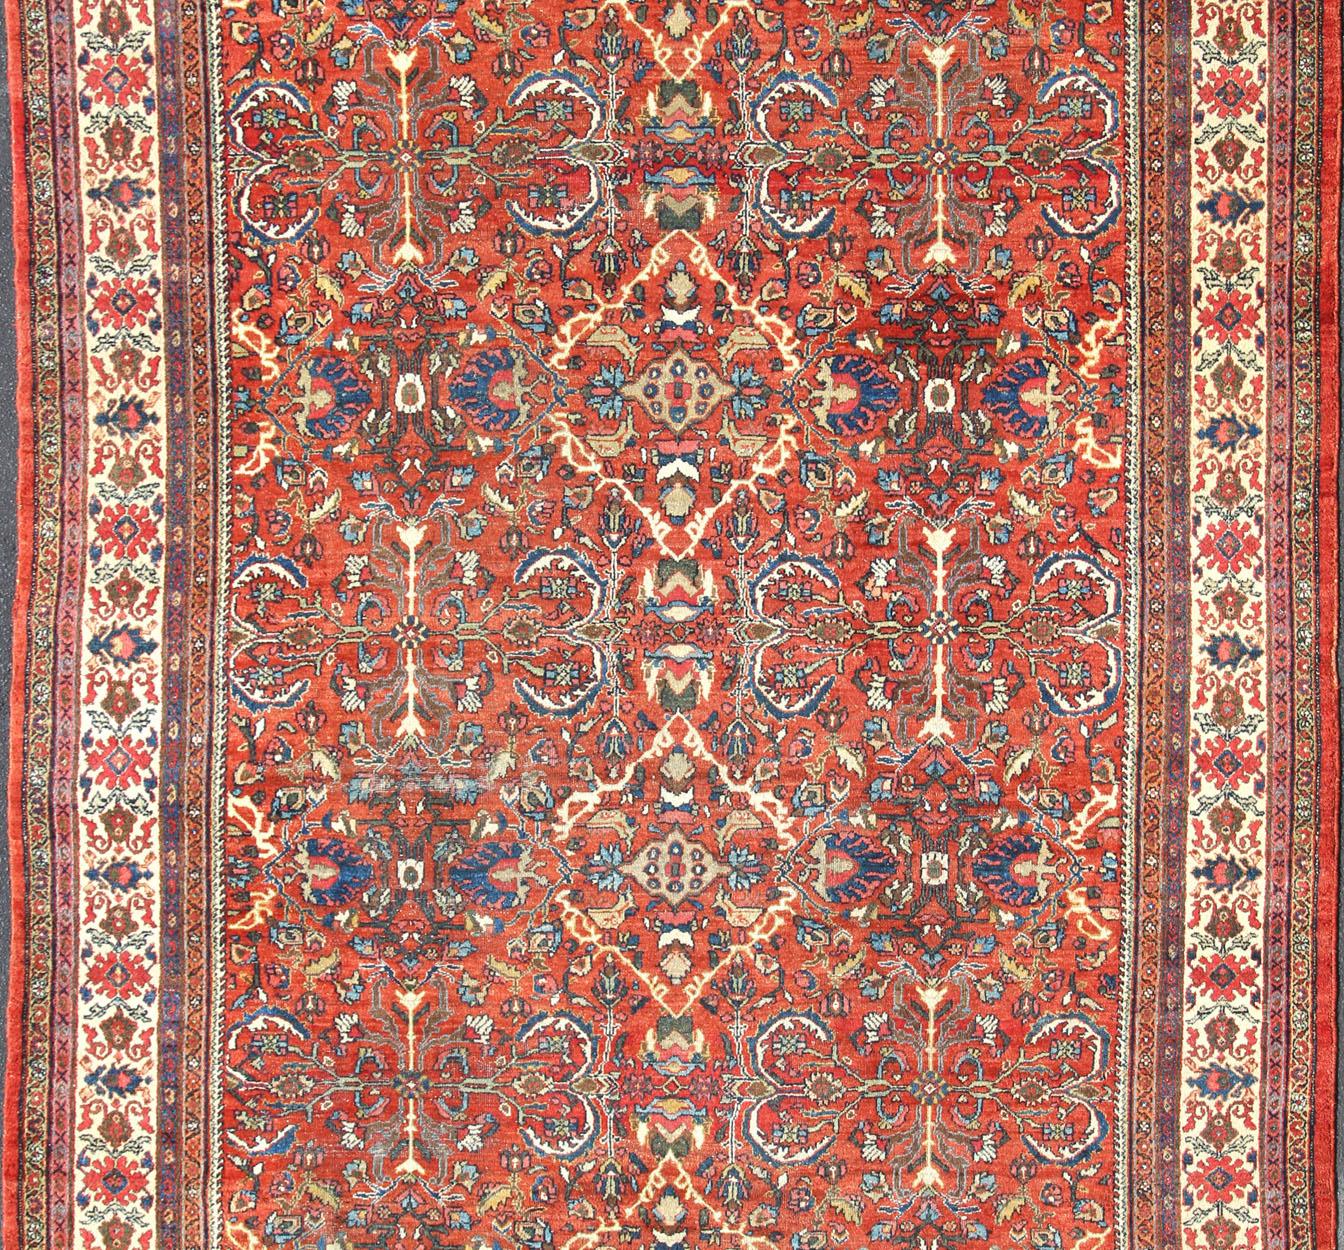 Red background antique Persian Mahal-Sultanabad rug with all-over large flowers. Keivan Woven Arts /  rug R20-0711-50, country of origin / type: Iran / Sultanabad, circa 1920
Measures: 10'10 x 14.
This antique Persian Mahal Sultanabad carpet (circa